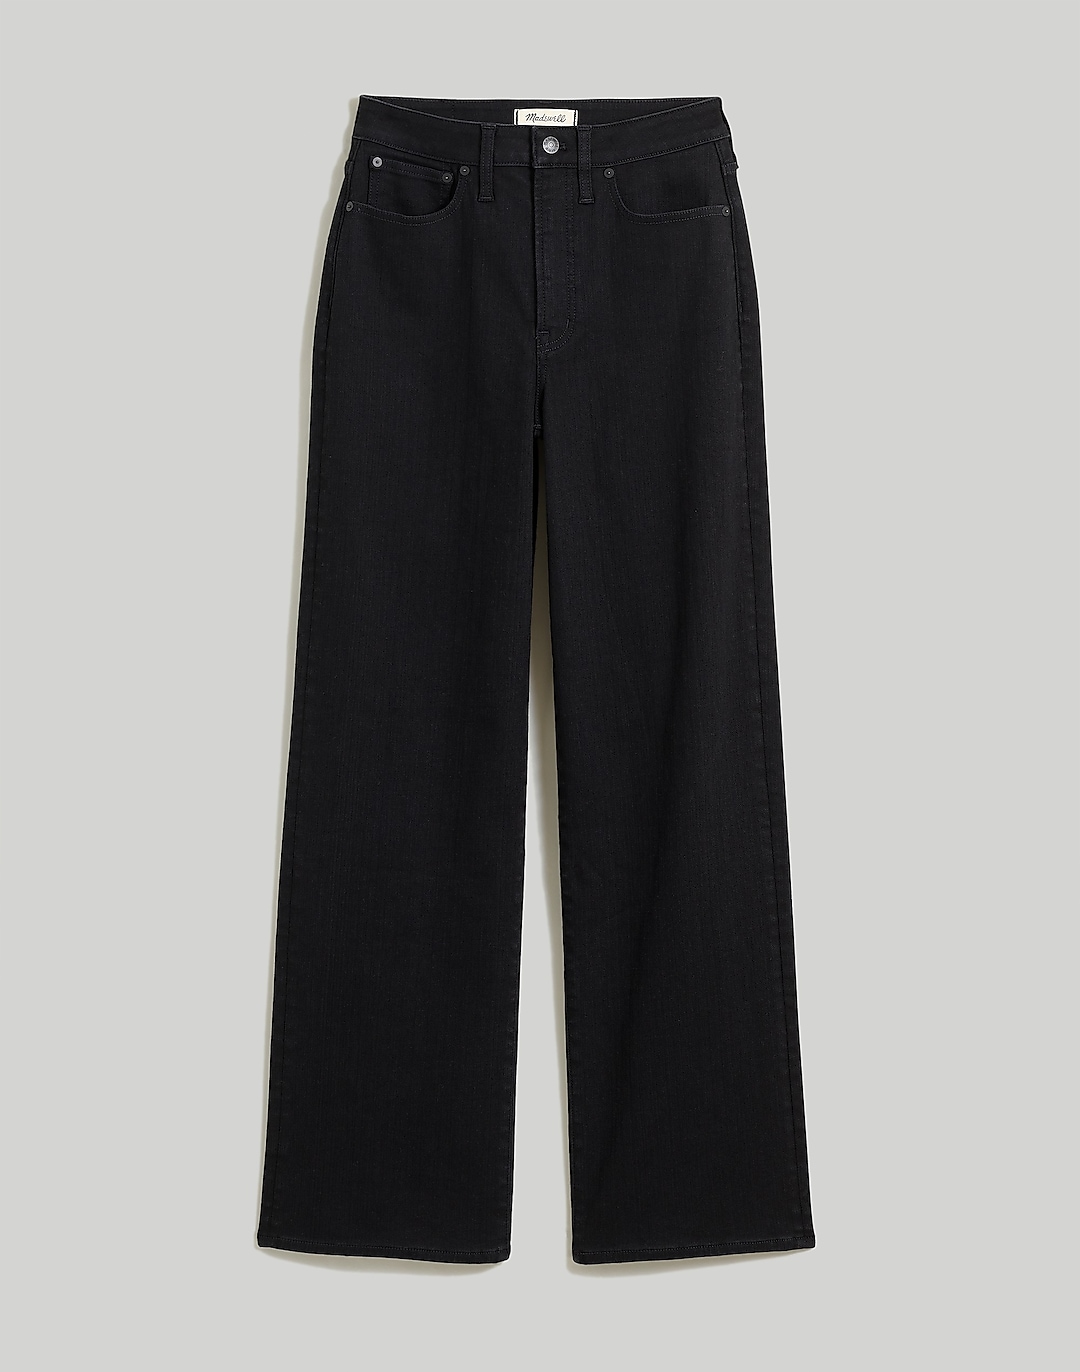 The Tall Curvy Perfect Vintage Wide-Leg Jean | Madewell